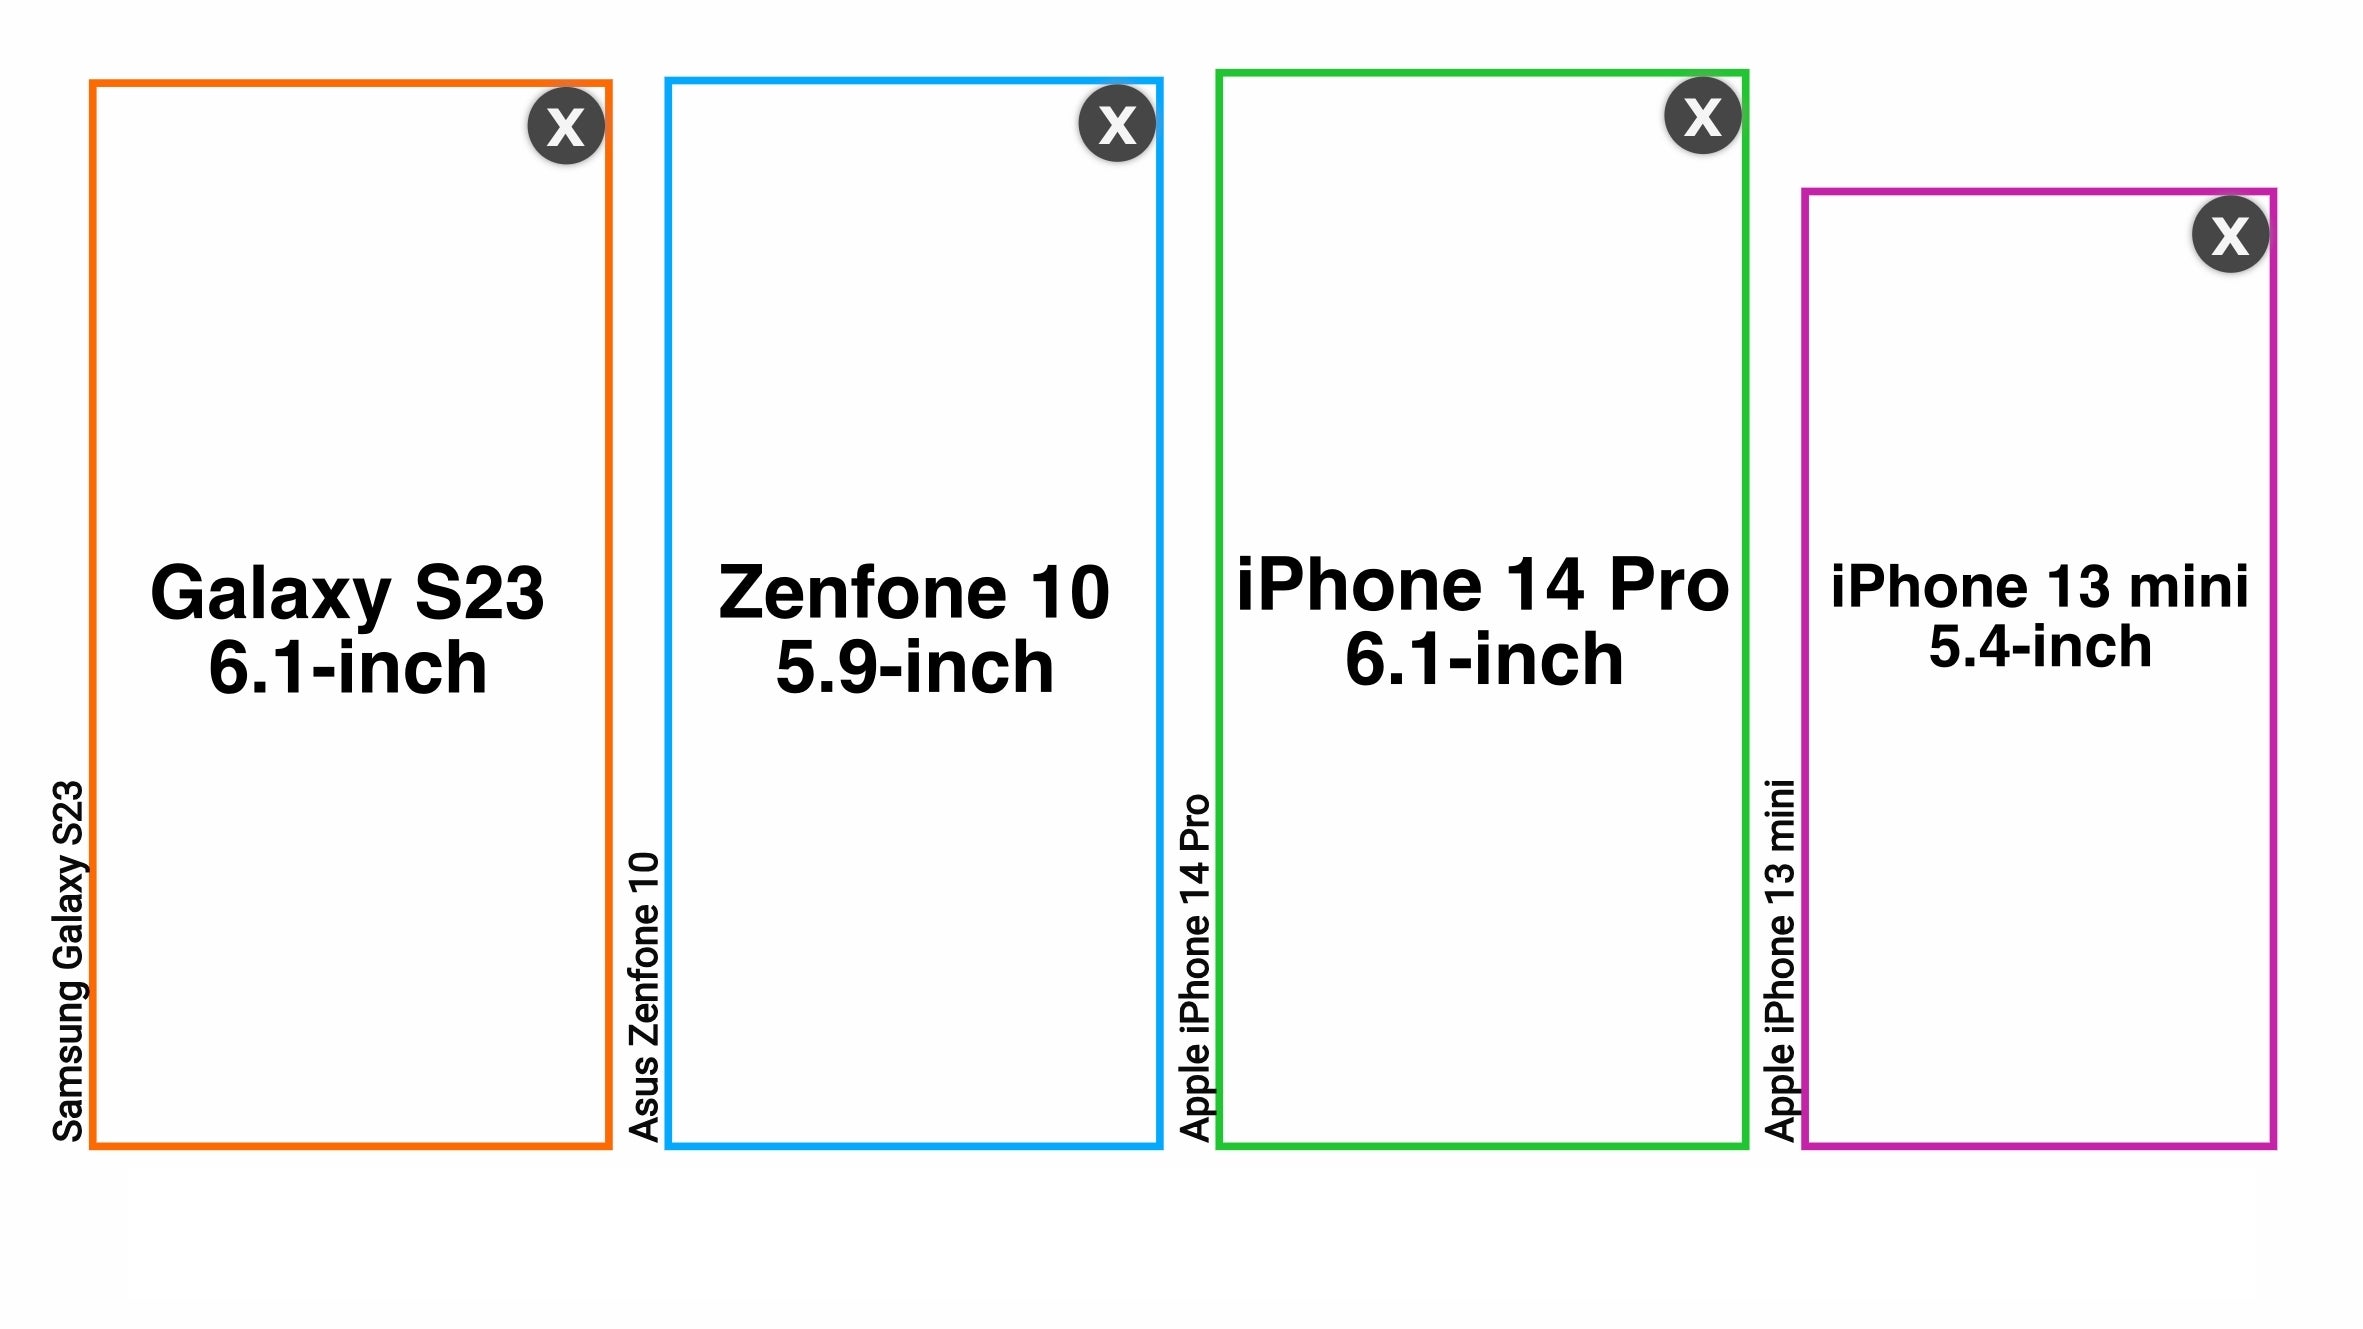 The Galaxy S23, iPhone 14, and iPhone 14 Pro are about as compact as the Zenfone 10, while the iPhone 13 mini takes the (small) cake. - Zenfone 10: Not how you compete with Samsung and Apple - Asus needs a reality check